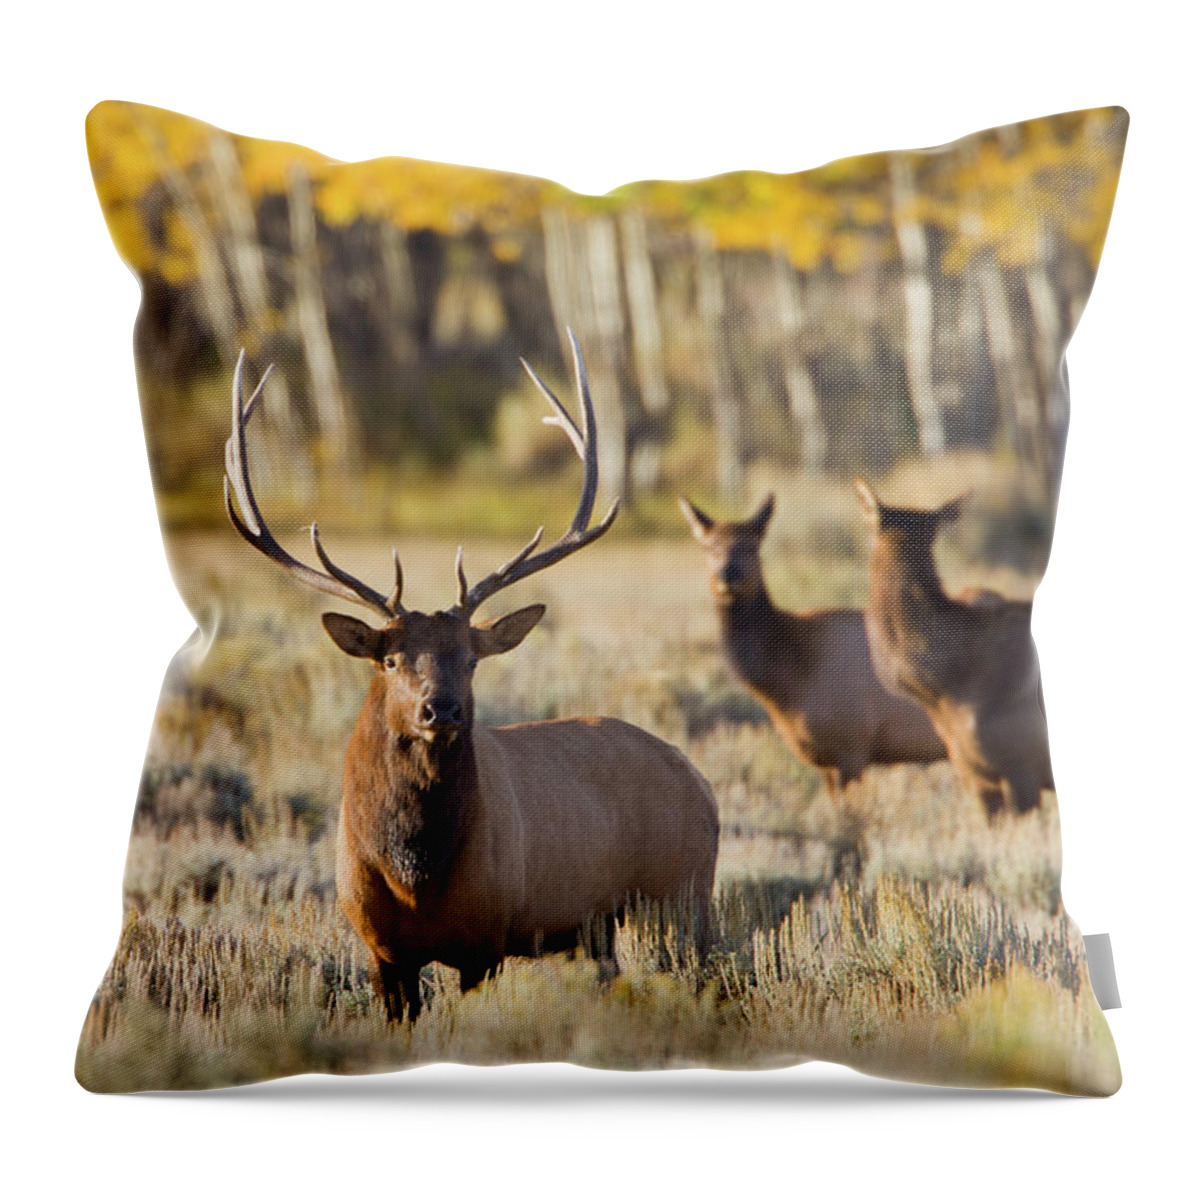 Vertebrate Throw Pillow featuring the photograph Elk Bull With Cows by Kencanning